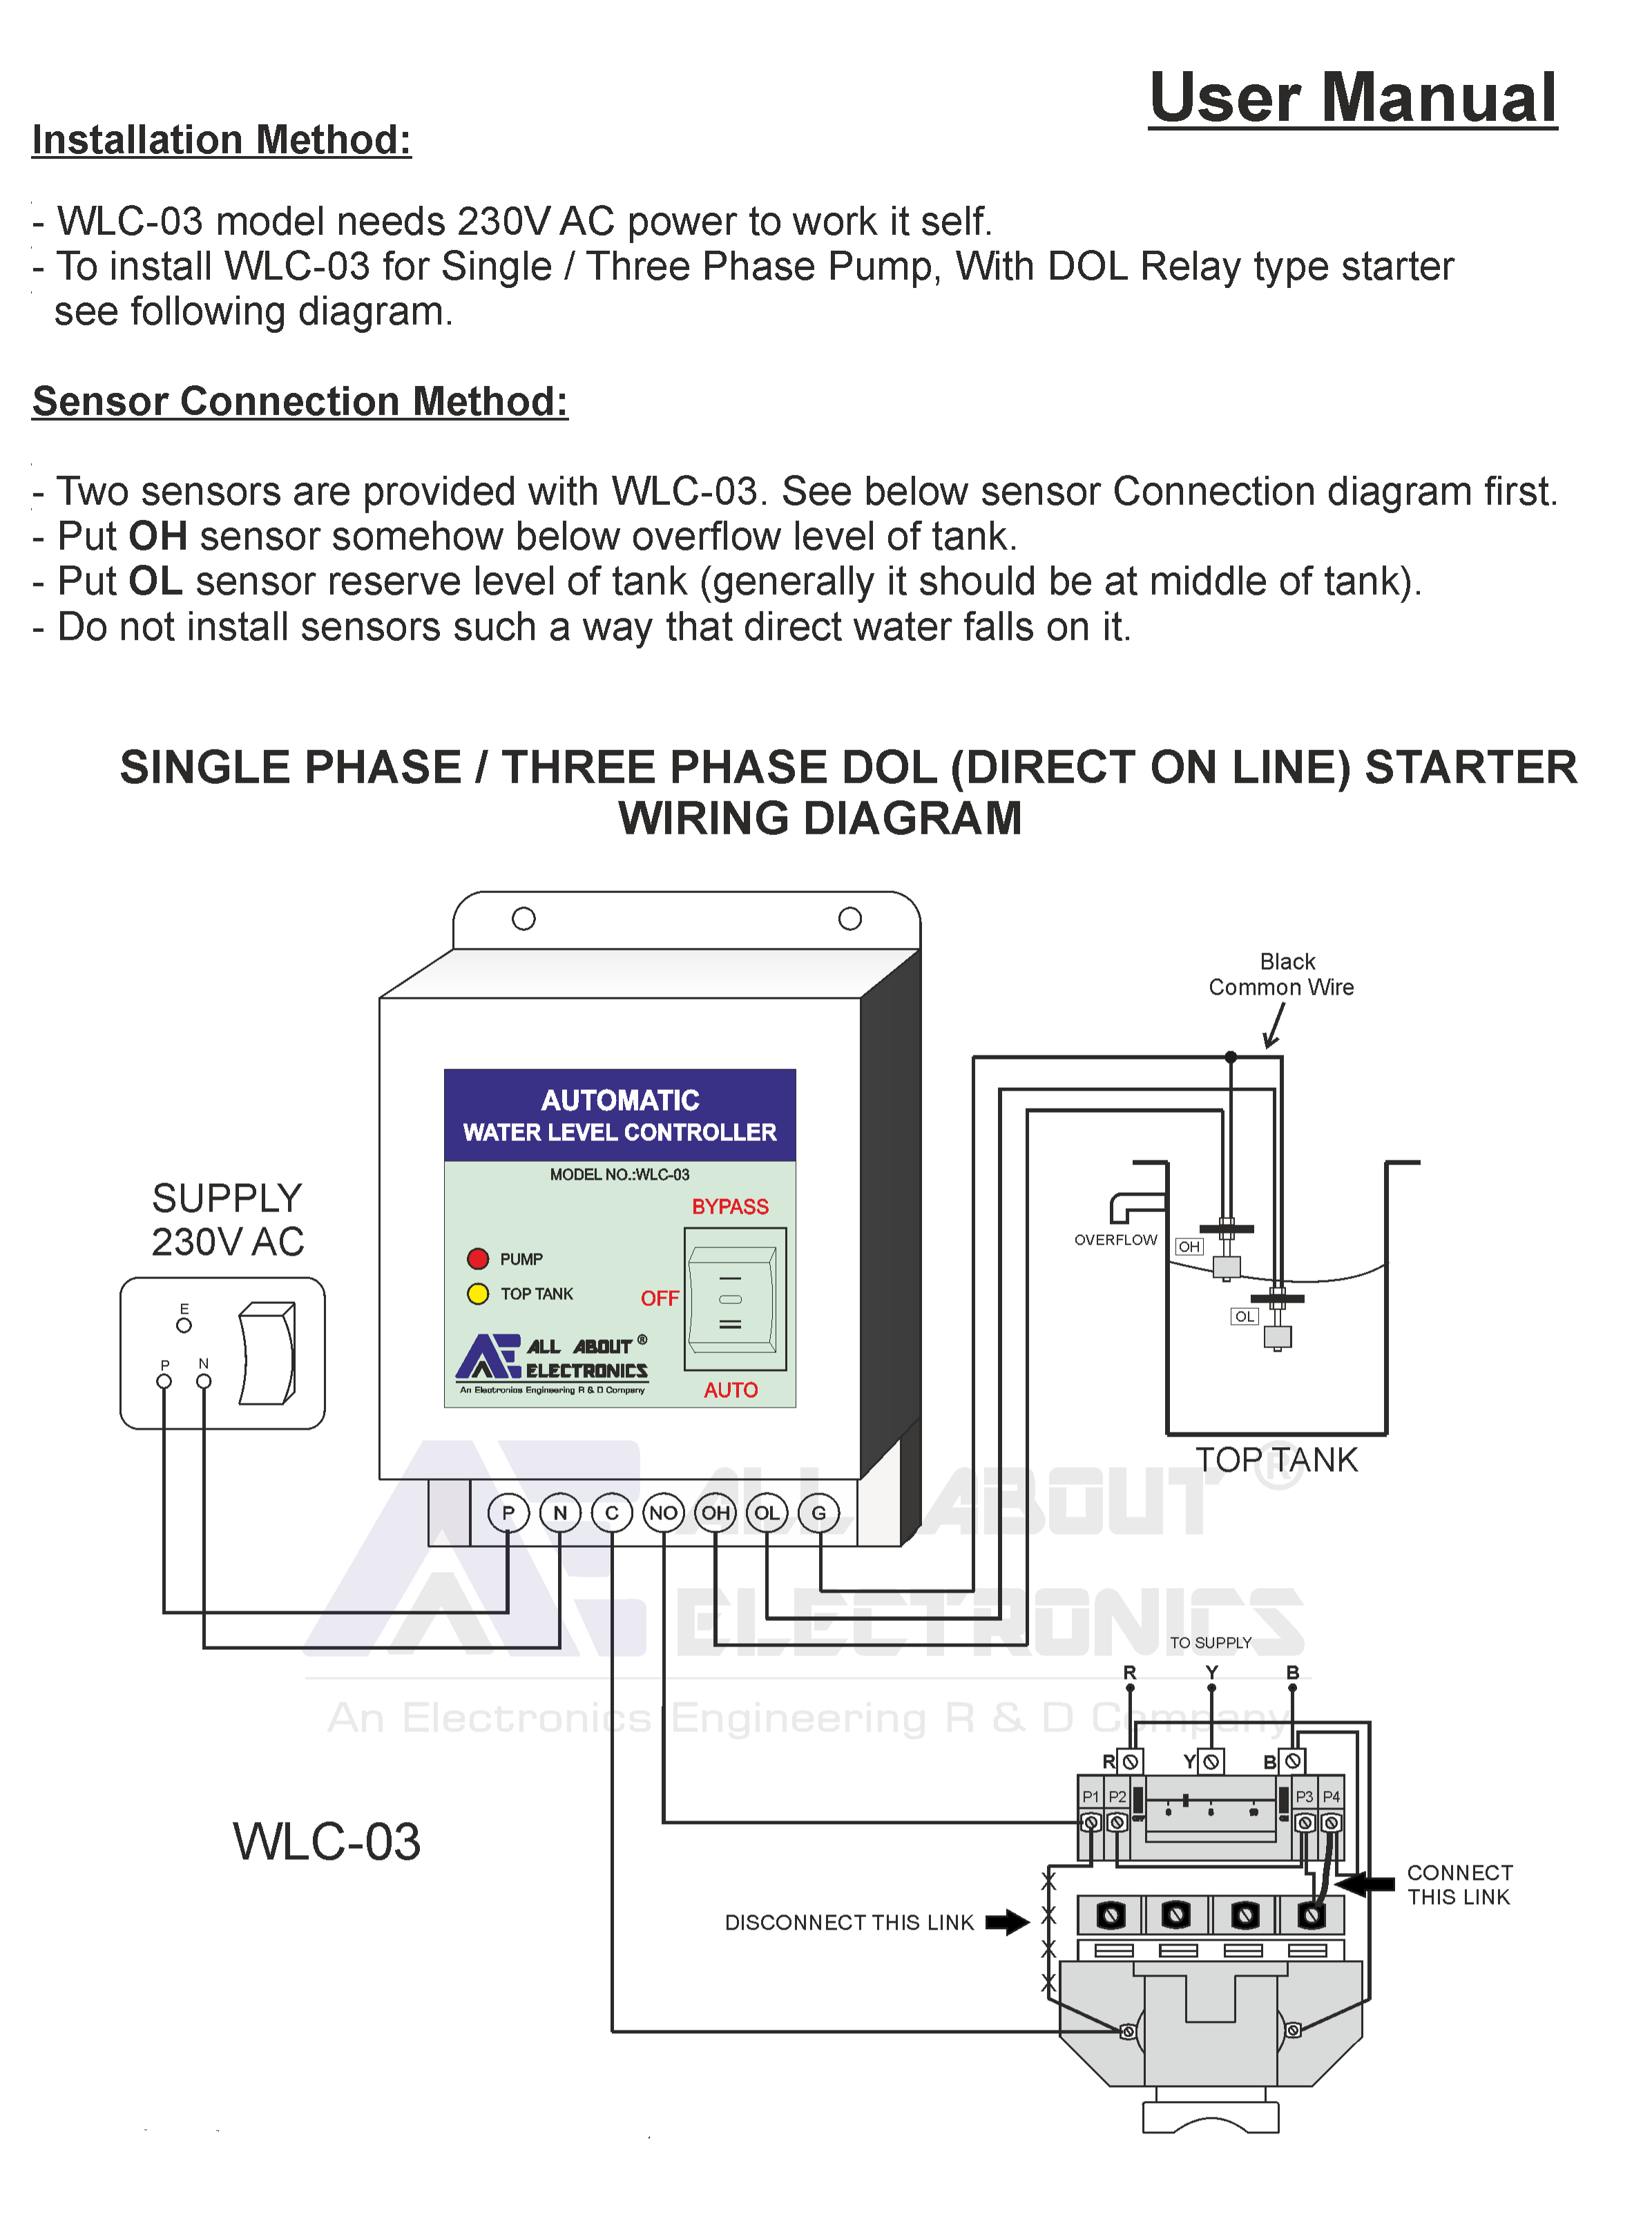 Automatic Water Level Controller With Magnetic Float Sensors (Model No. WLC-03)